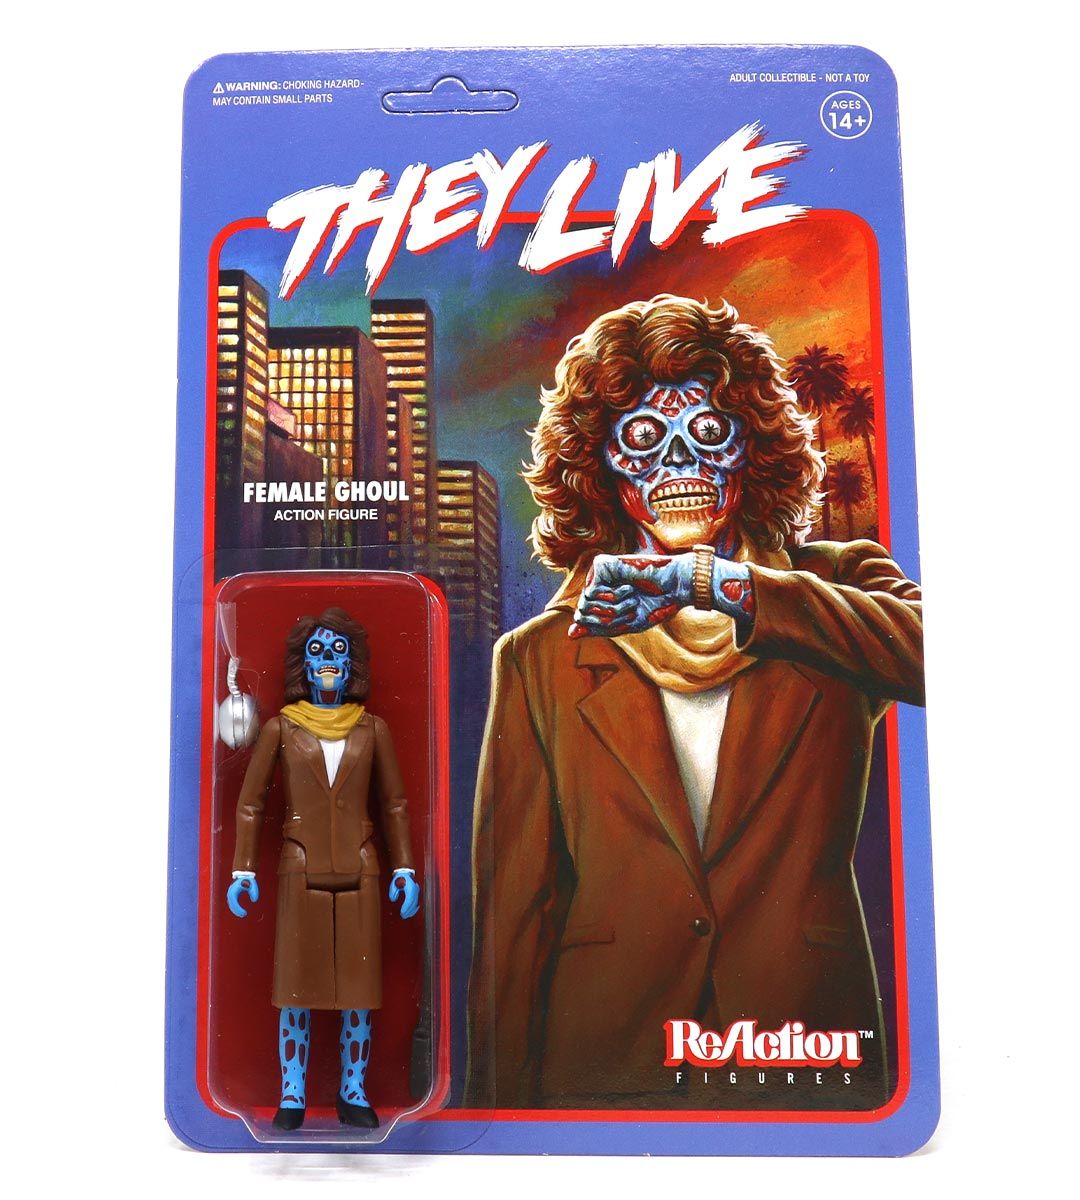 Female Ghoul - They Live - ReAction figure